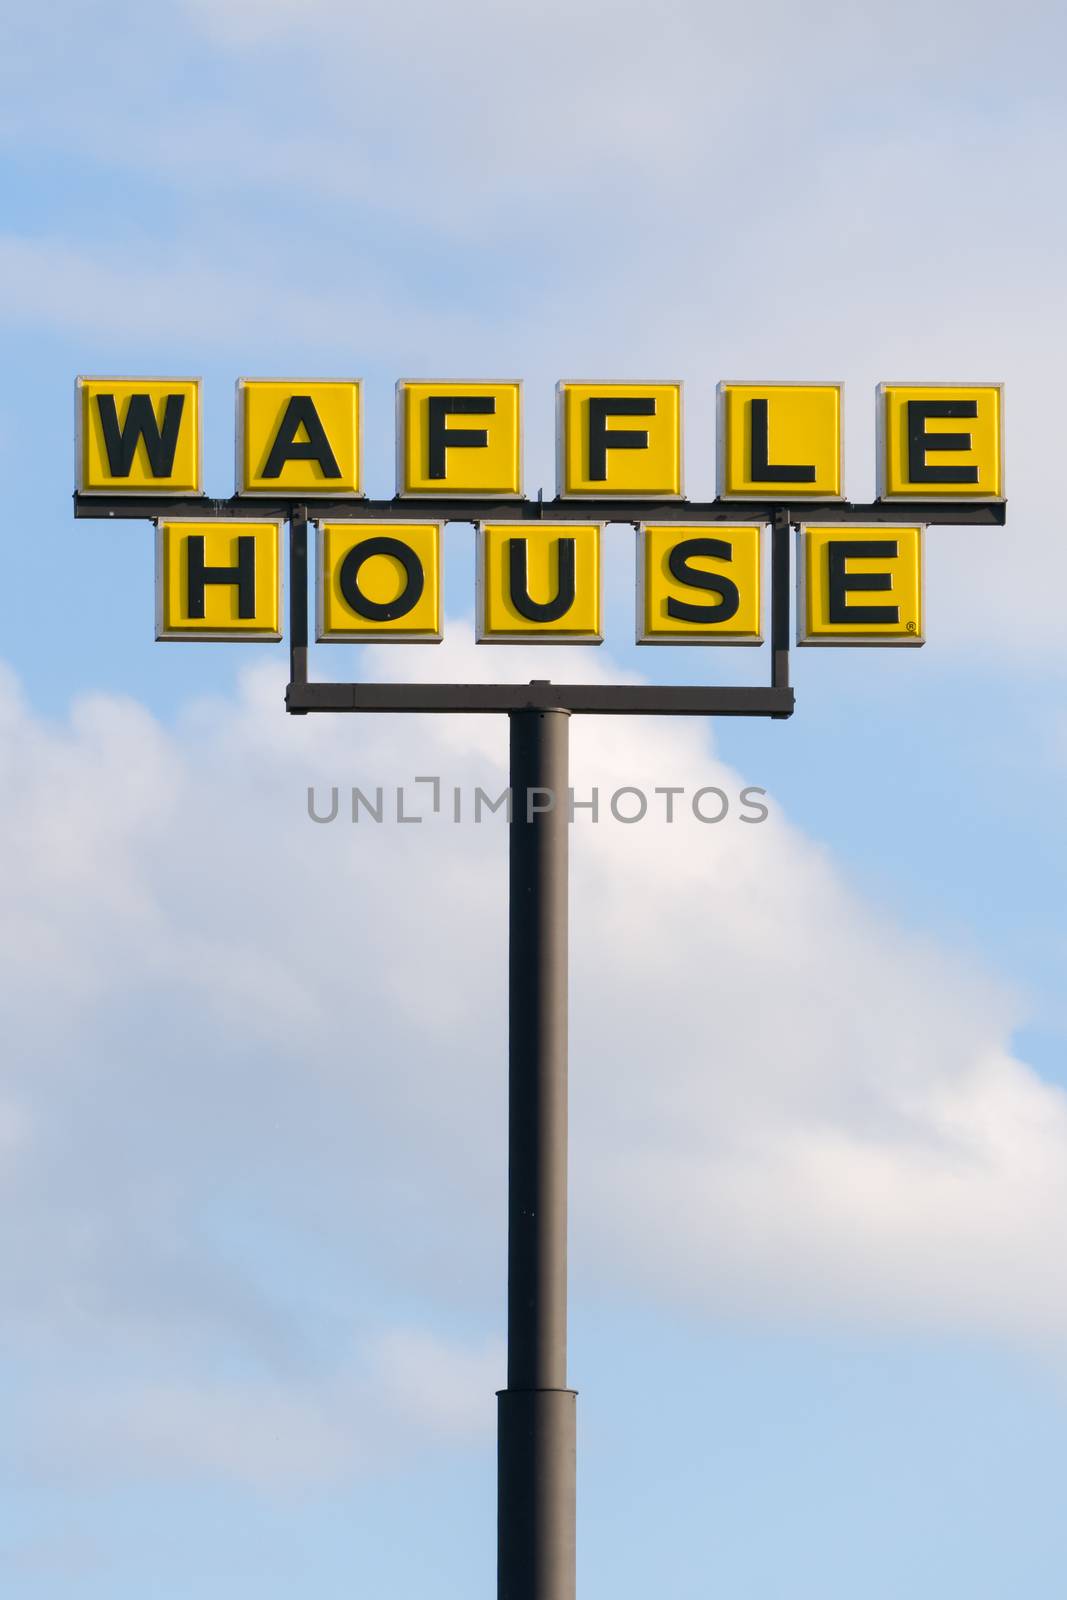 MOORE, OK/USA - MAY 20, 2016: Waffle House exterior sign and logo. Waffle House, Inc., is a restaurant chain with more than 2,100 locations in 25 states in the United States.